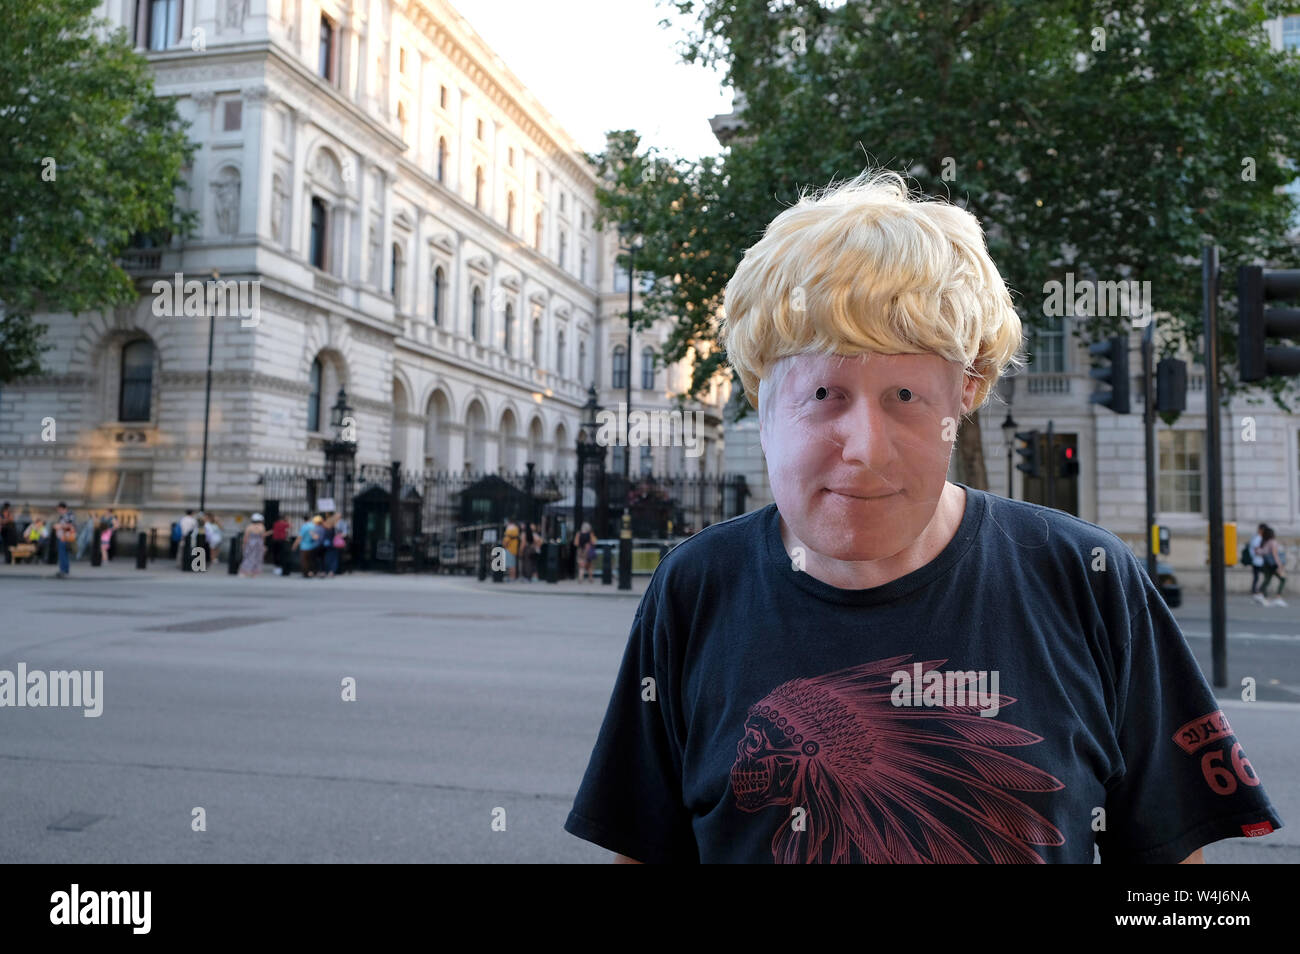 A protester wearing a Boris Johnson's mask and a fake blonde wig outside Downing Street during the rally in London.Protesters gathered outside Downing Street to protest against the announcement of Tory Boris Johnson as a new UK Prime Minister, who was elected only by less than 150,000 members of the Conservative party, a party that doesn’t hold a majority in Parliament. They demanding an immediate general election and launched plans to protest at the Conservative party national conference later this year. Stock Photo